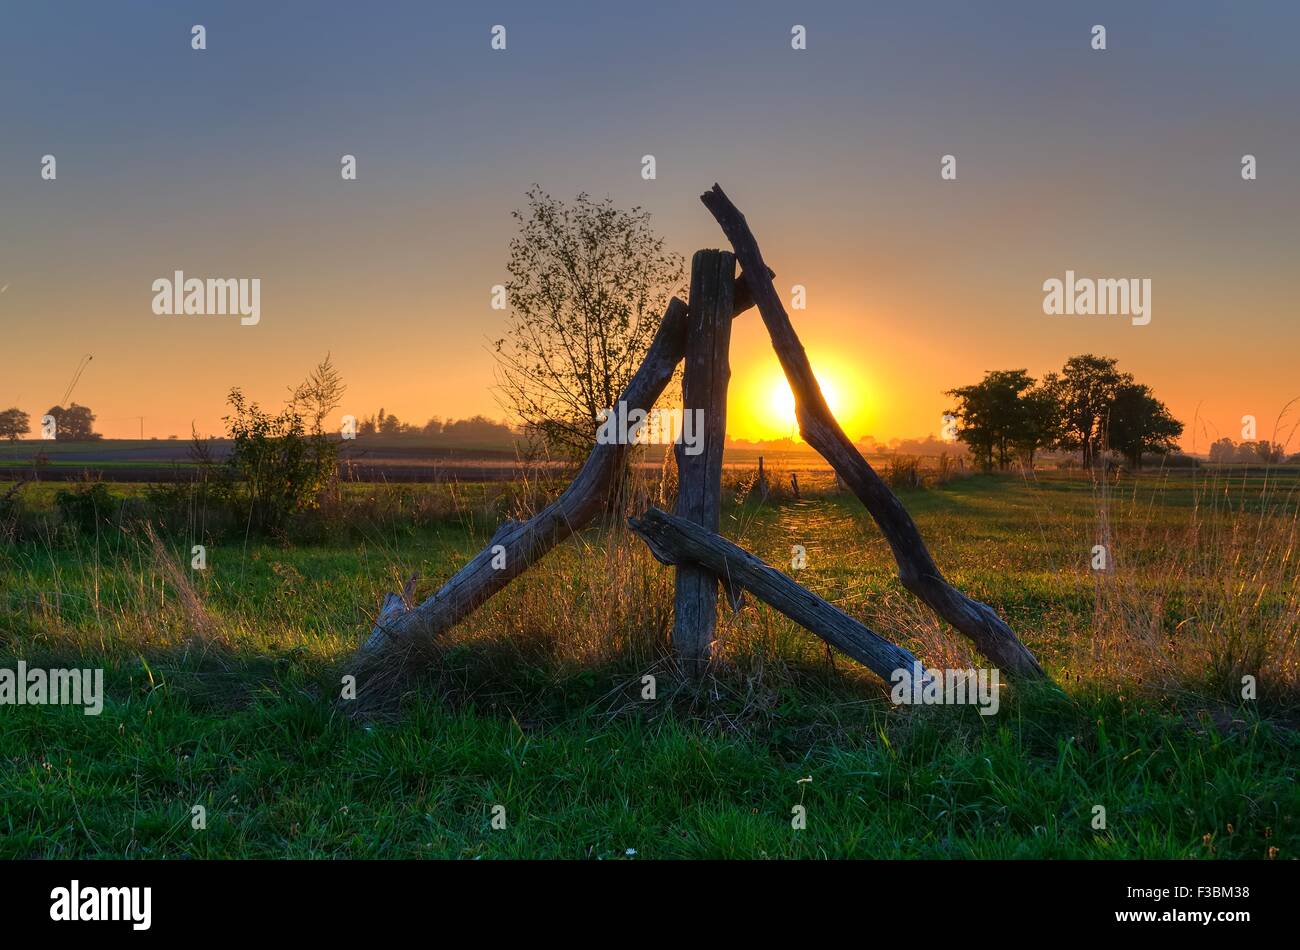 Autumn landscape. Wooden structure and rural landscape at sunset. Stock Photo